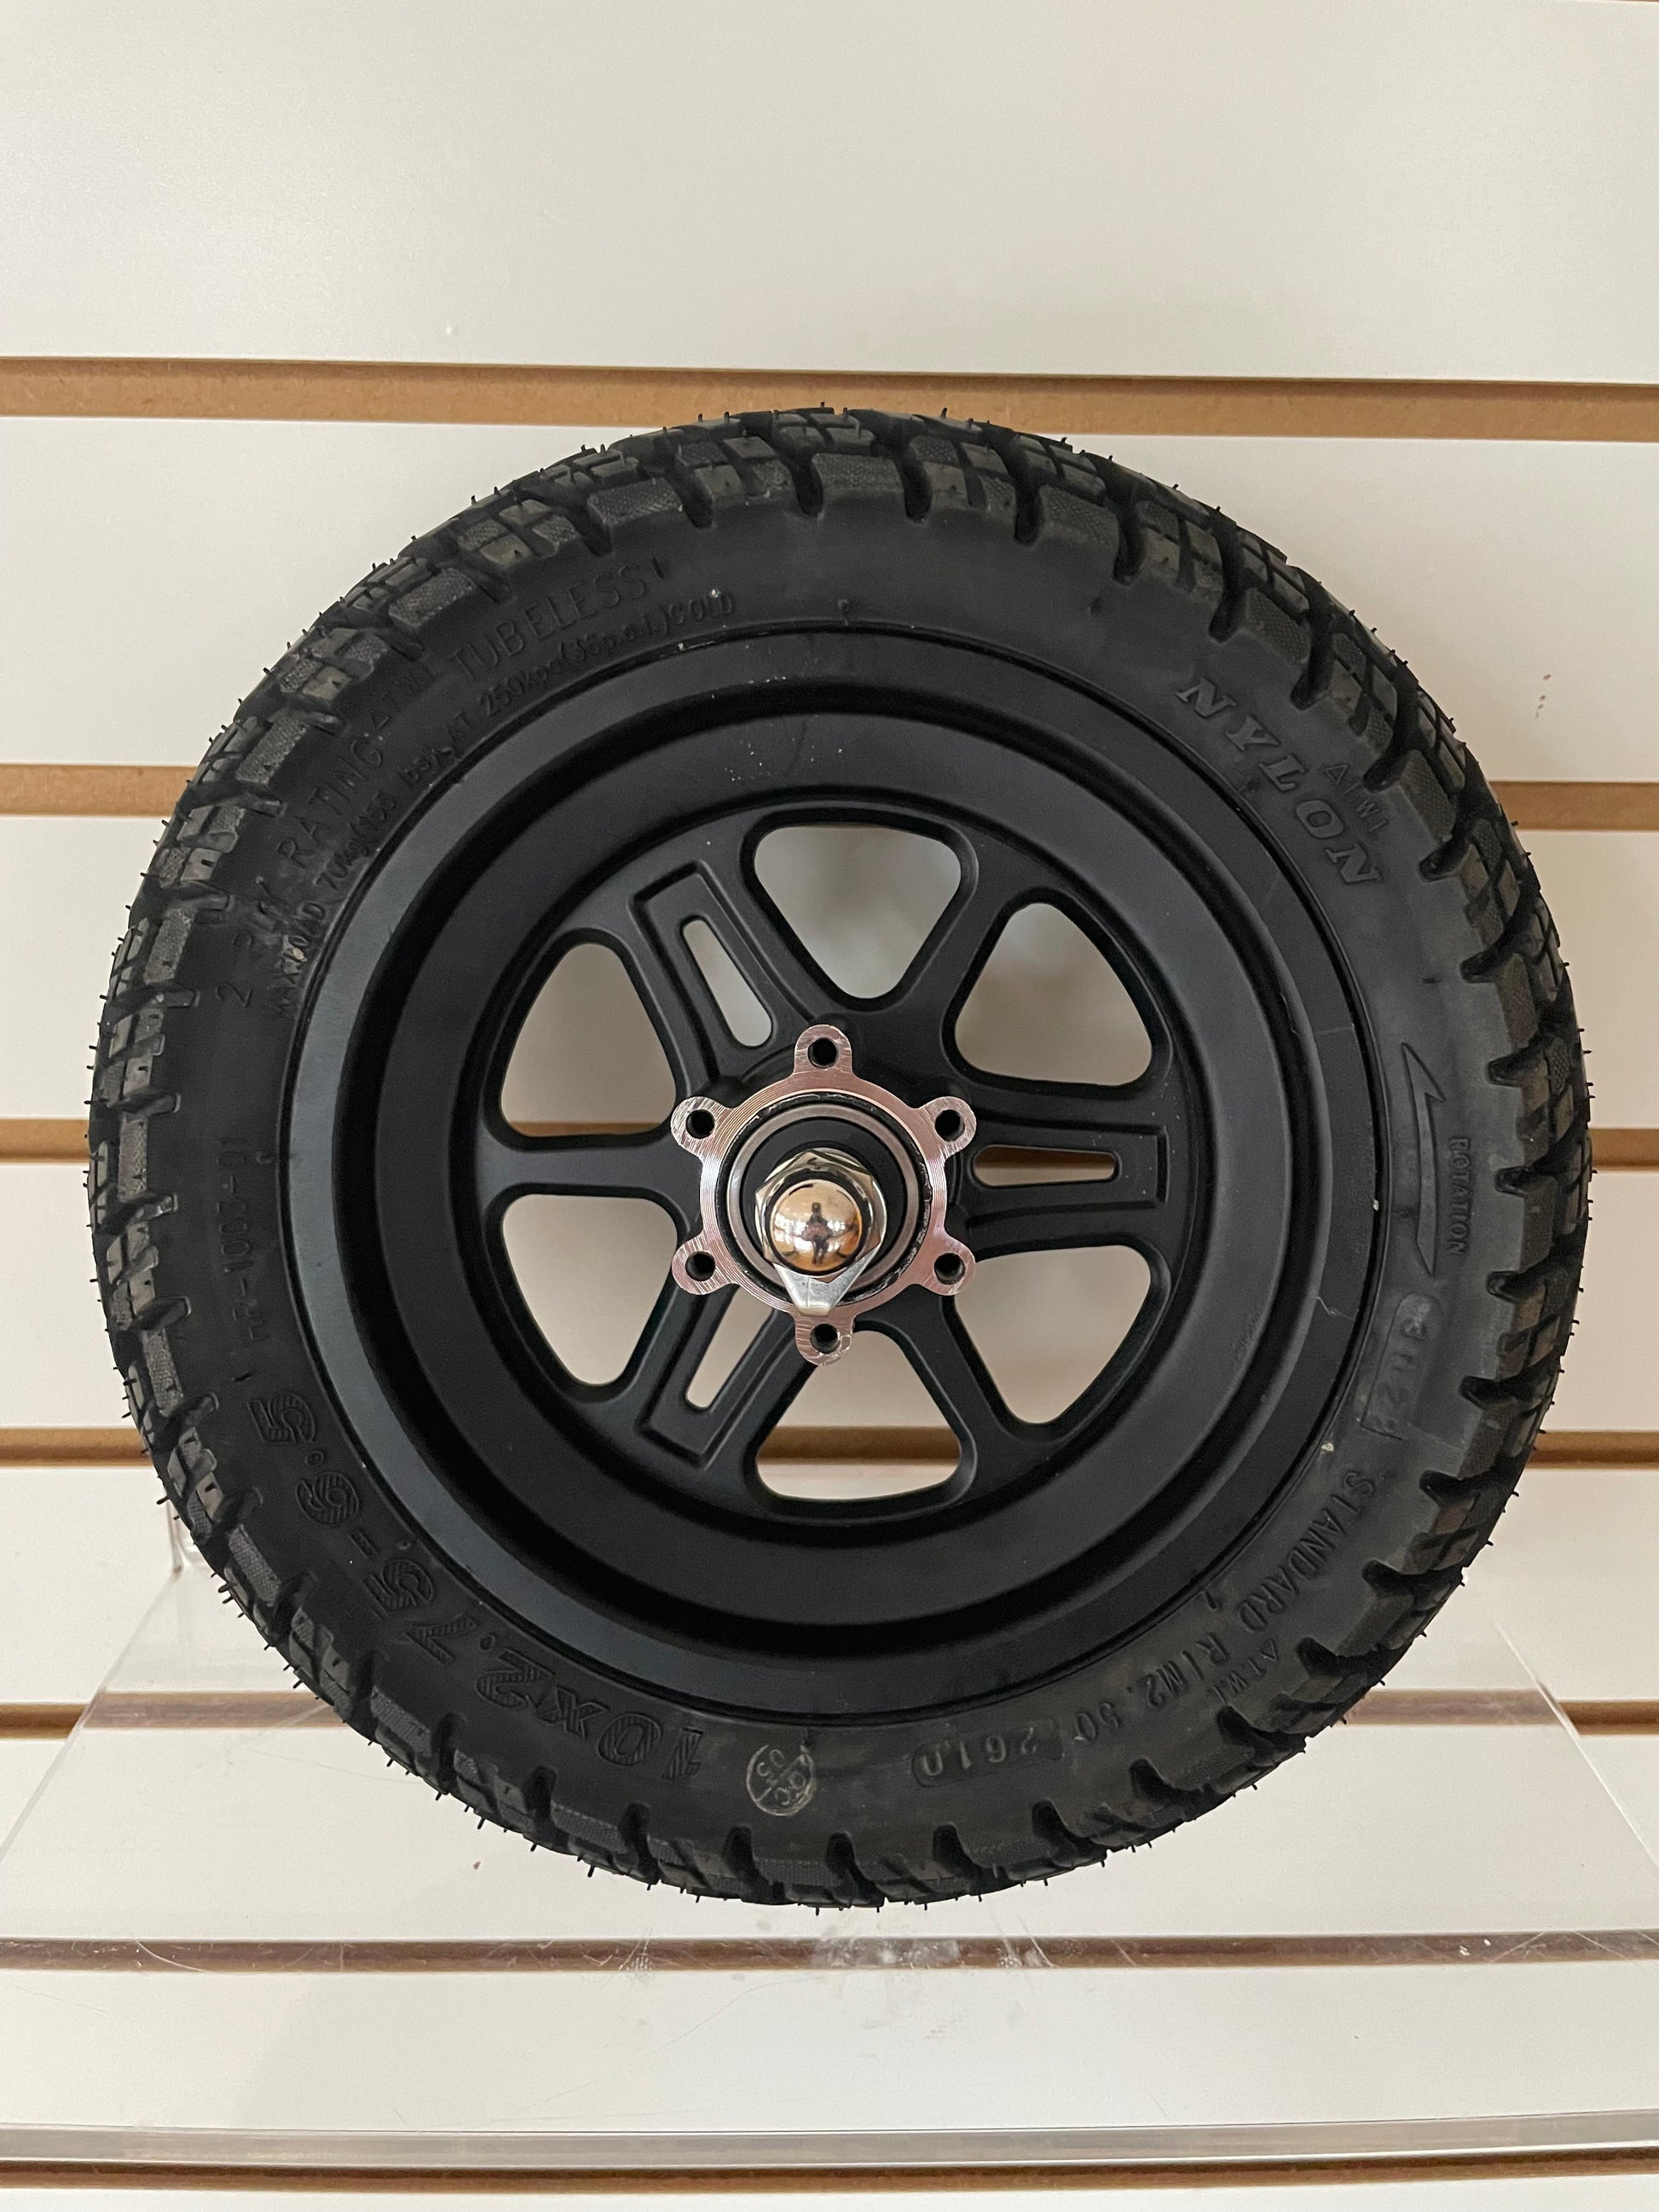  2.75-10 Scooter Tire, 2.75-10 Tubeless Tire 14 x 2.75 Tire